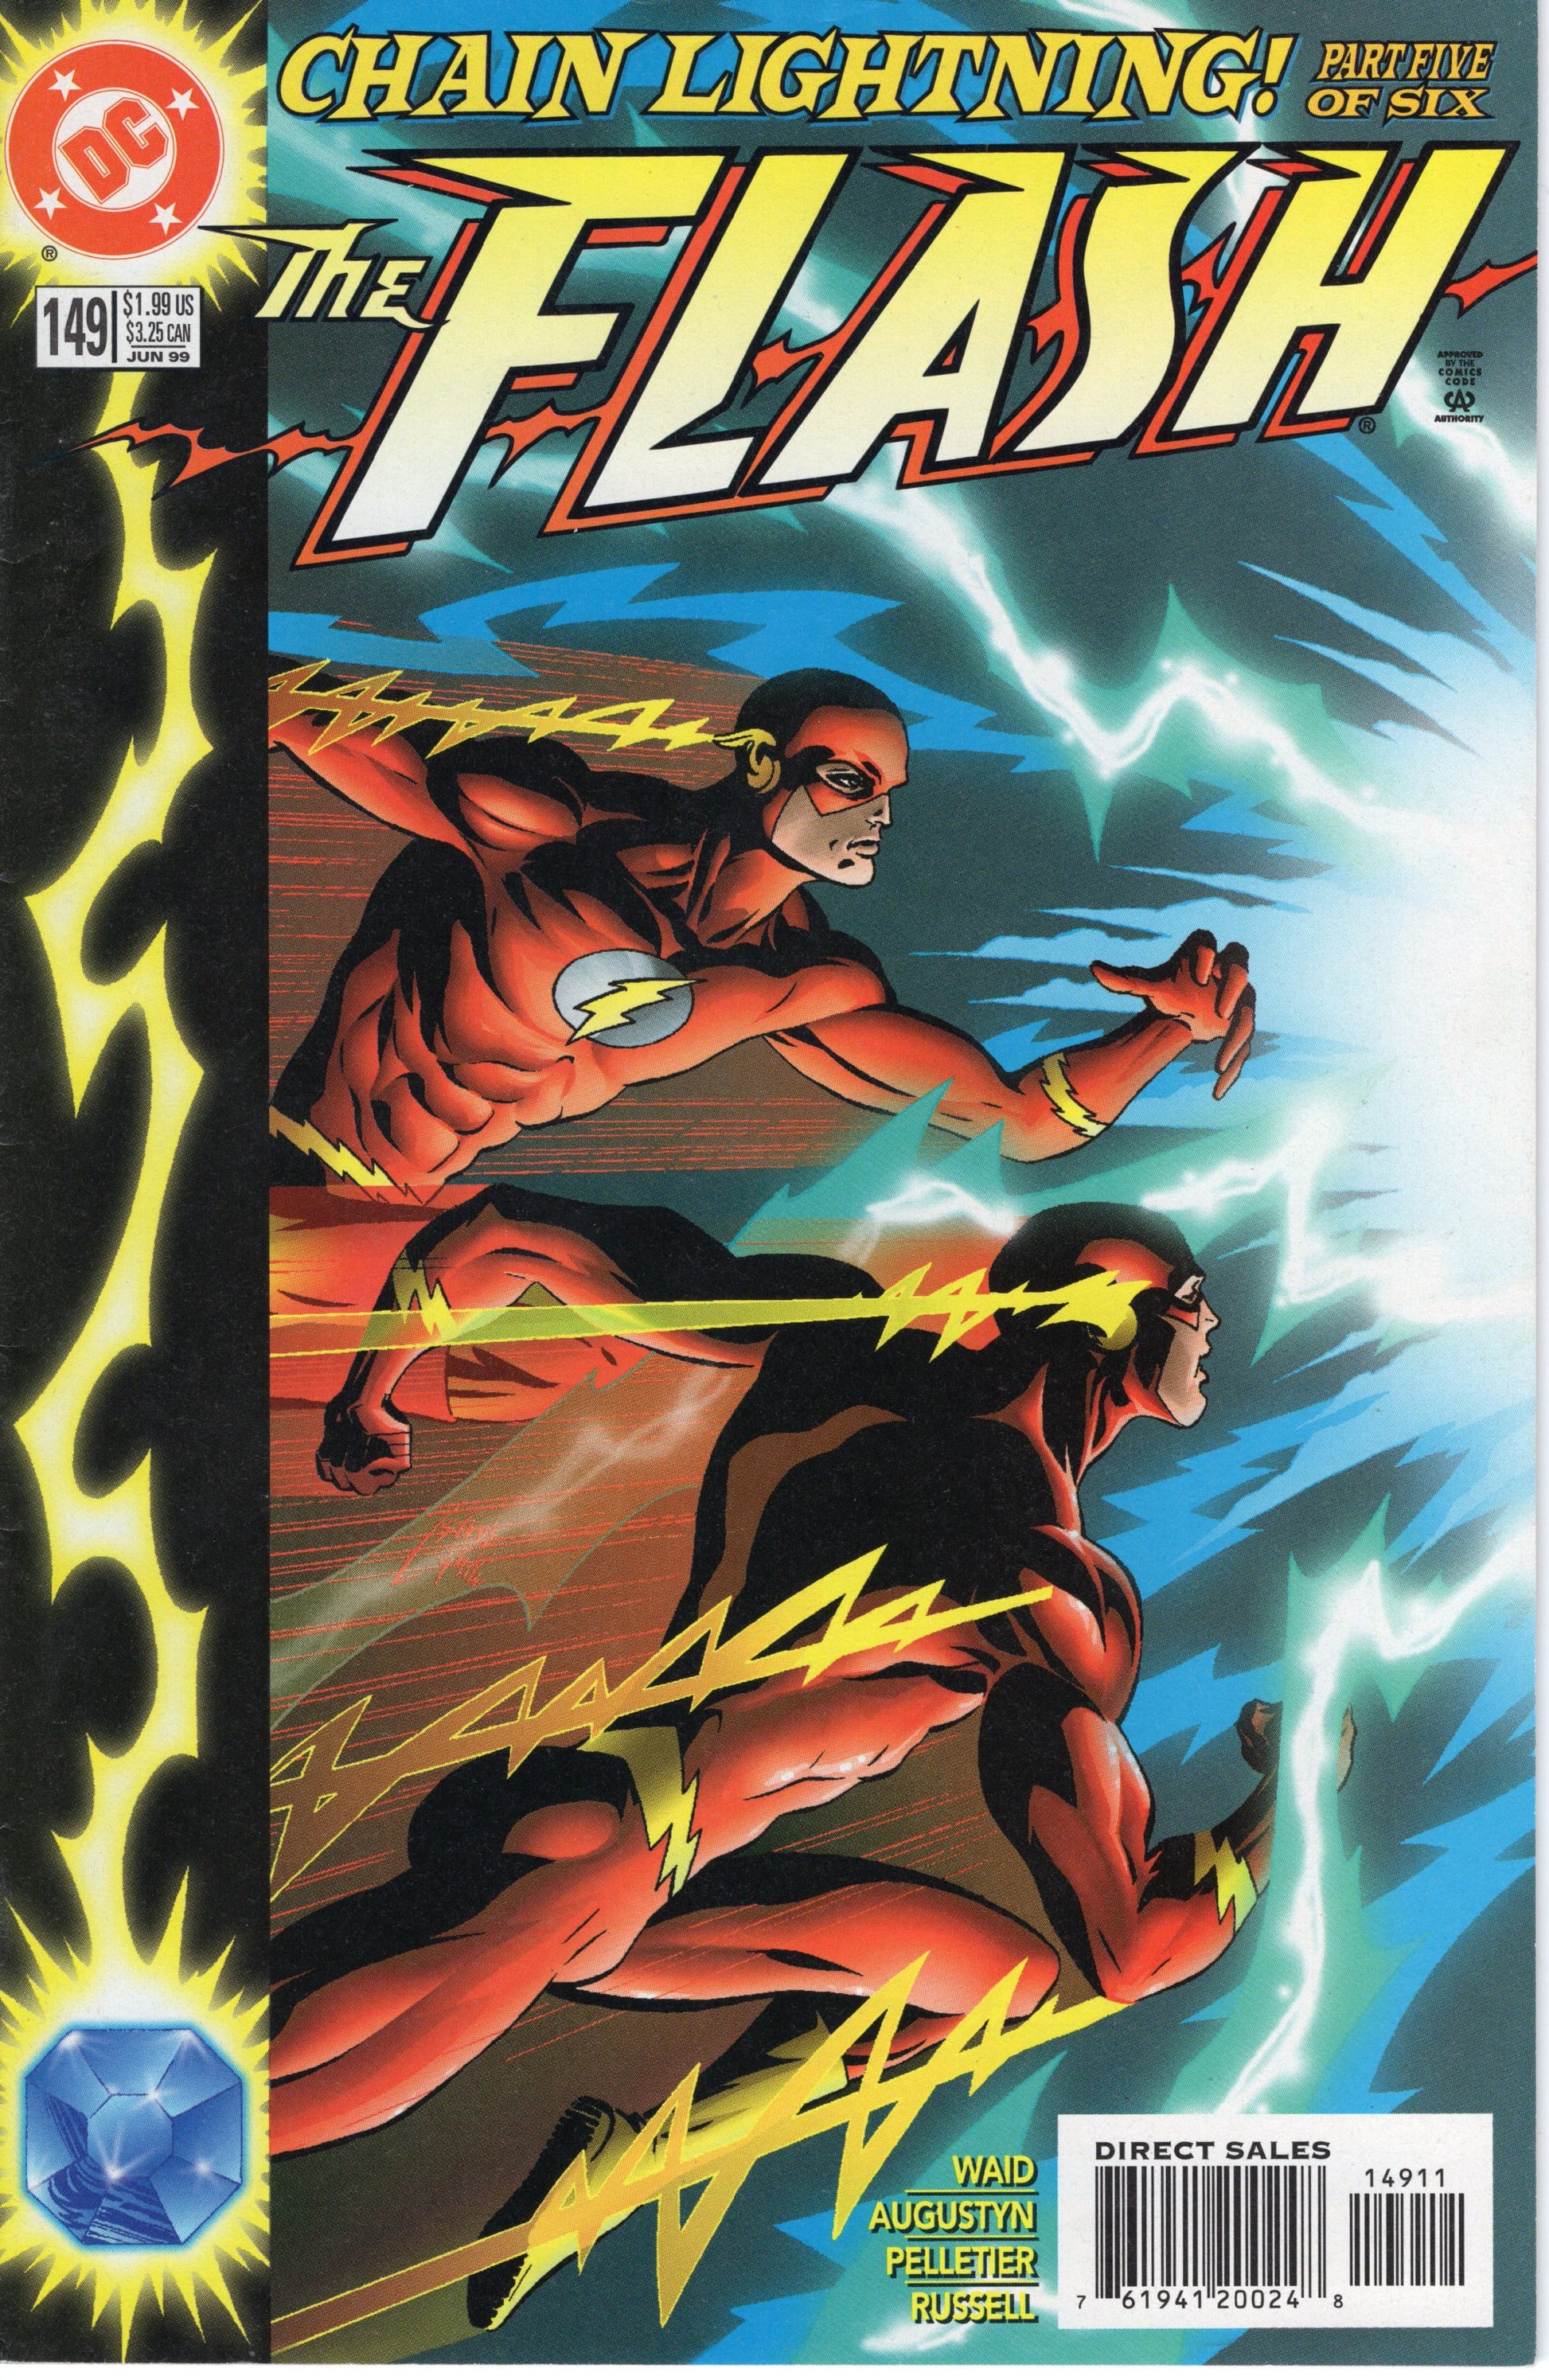 The Flash - Issue #149 (June, 1999 - DC Comics) VF-